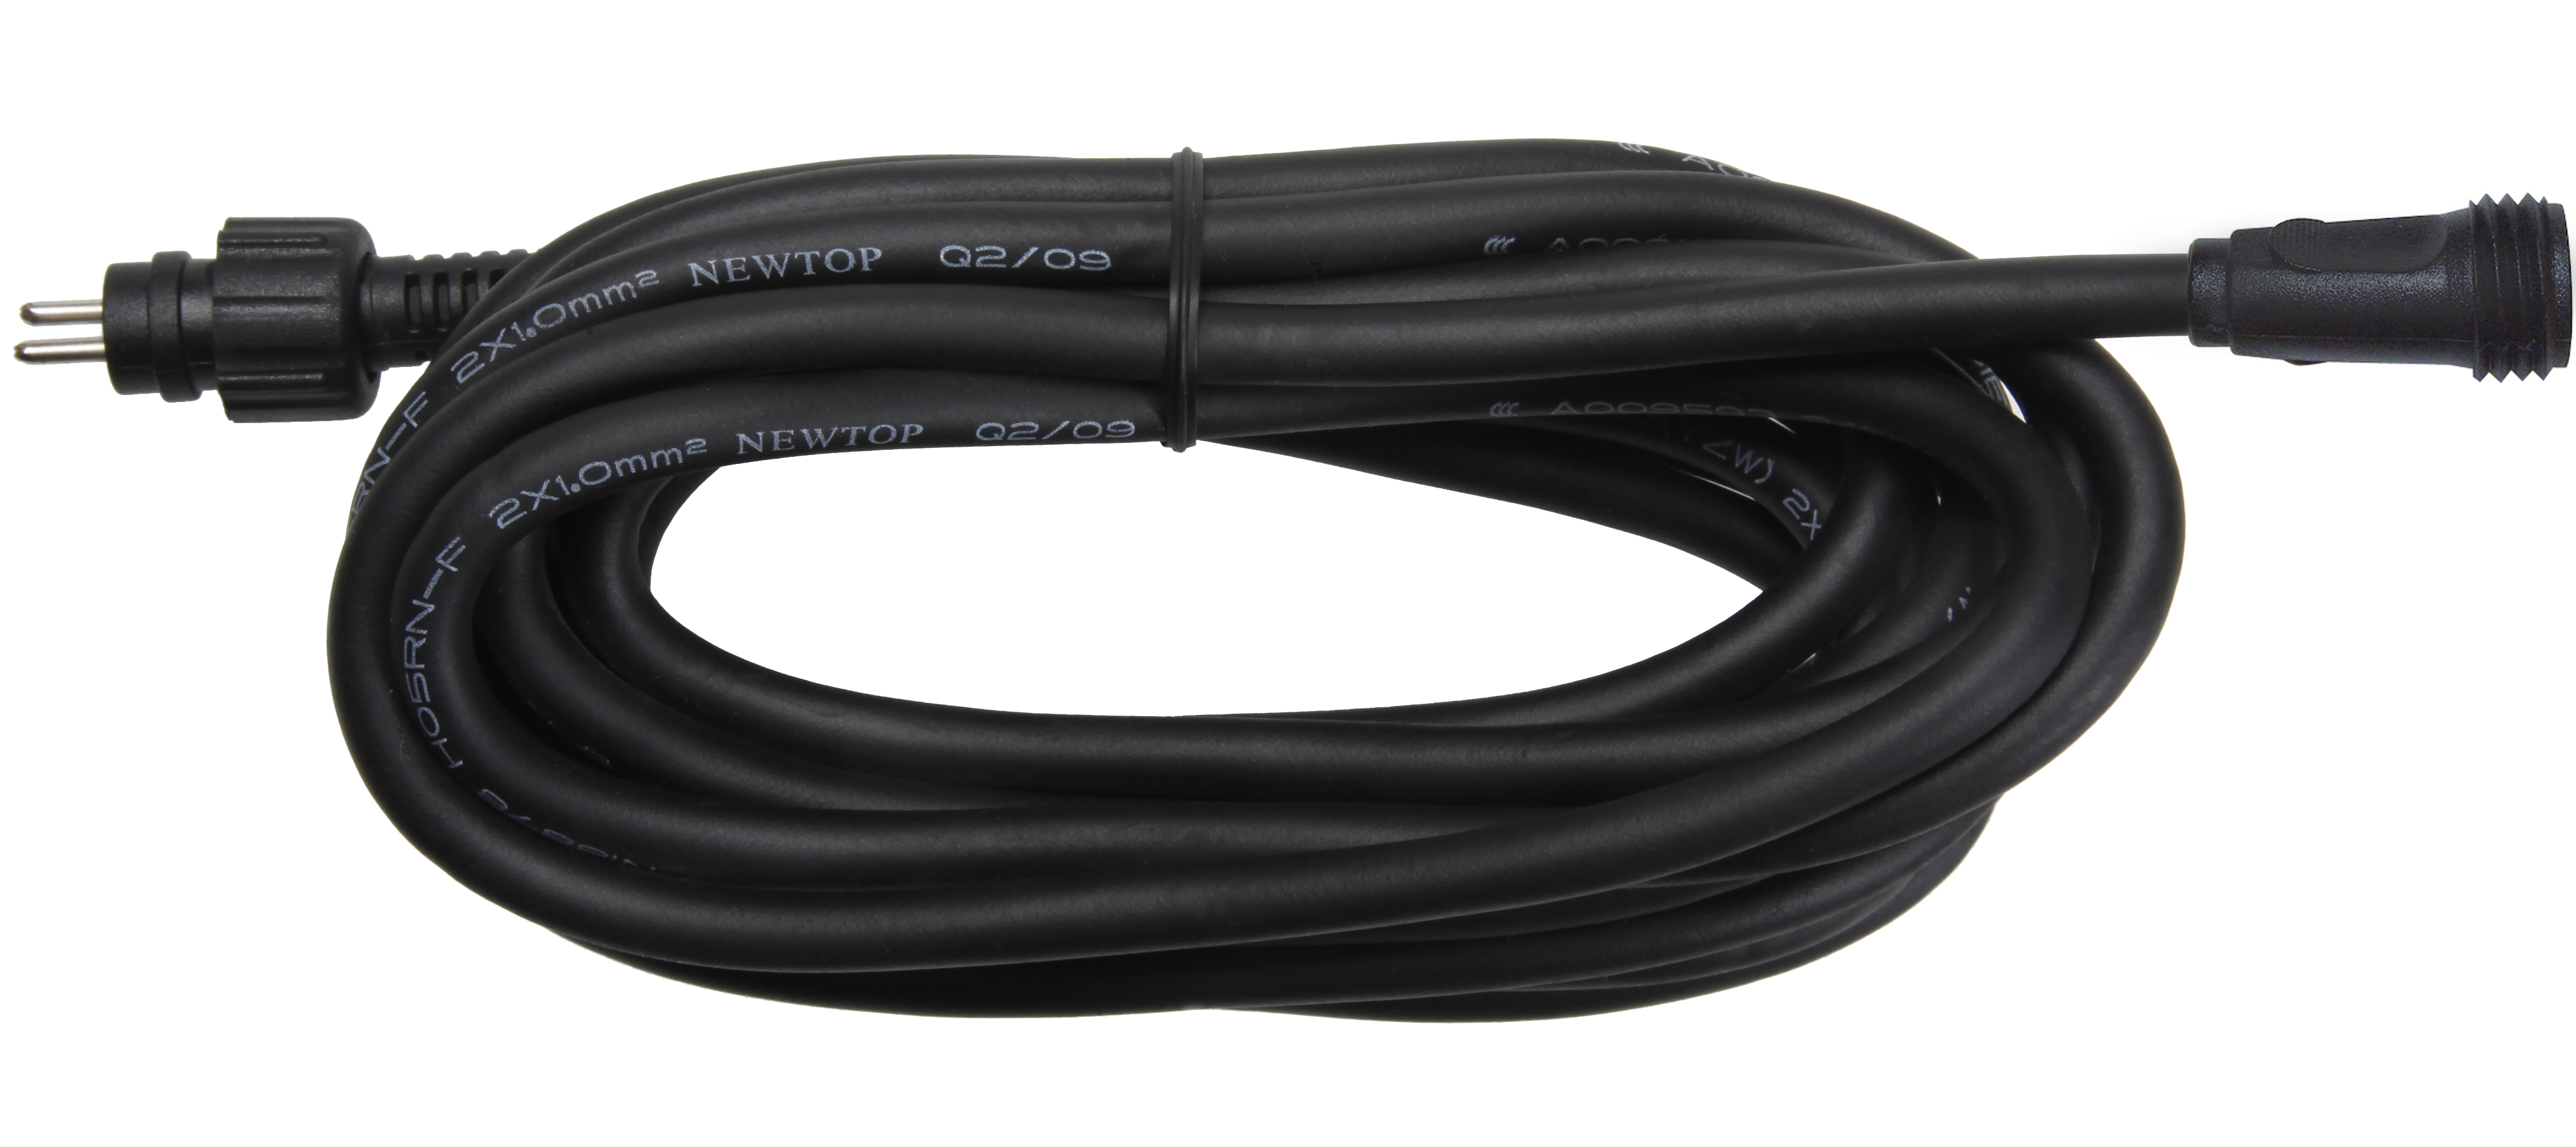 Techmar 12v Rubber extension cable with screw connectors 2m